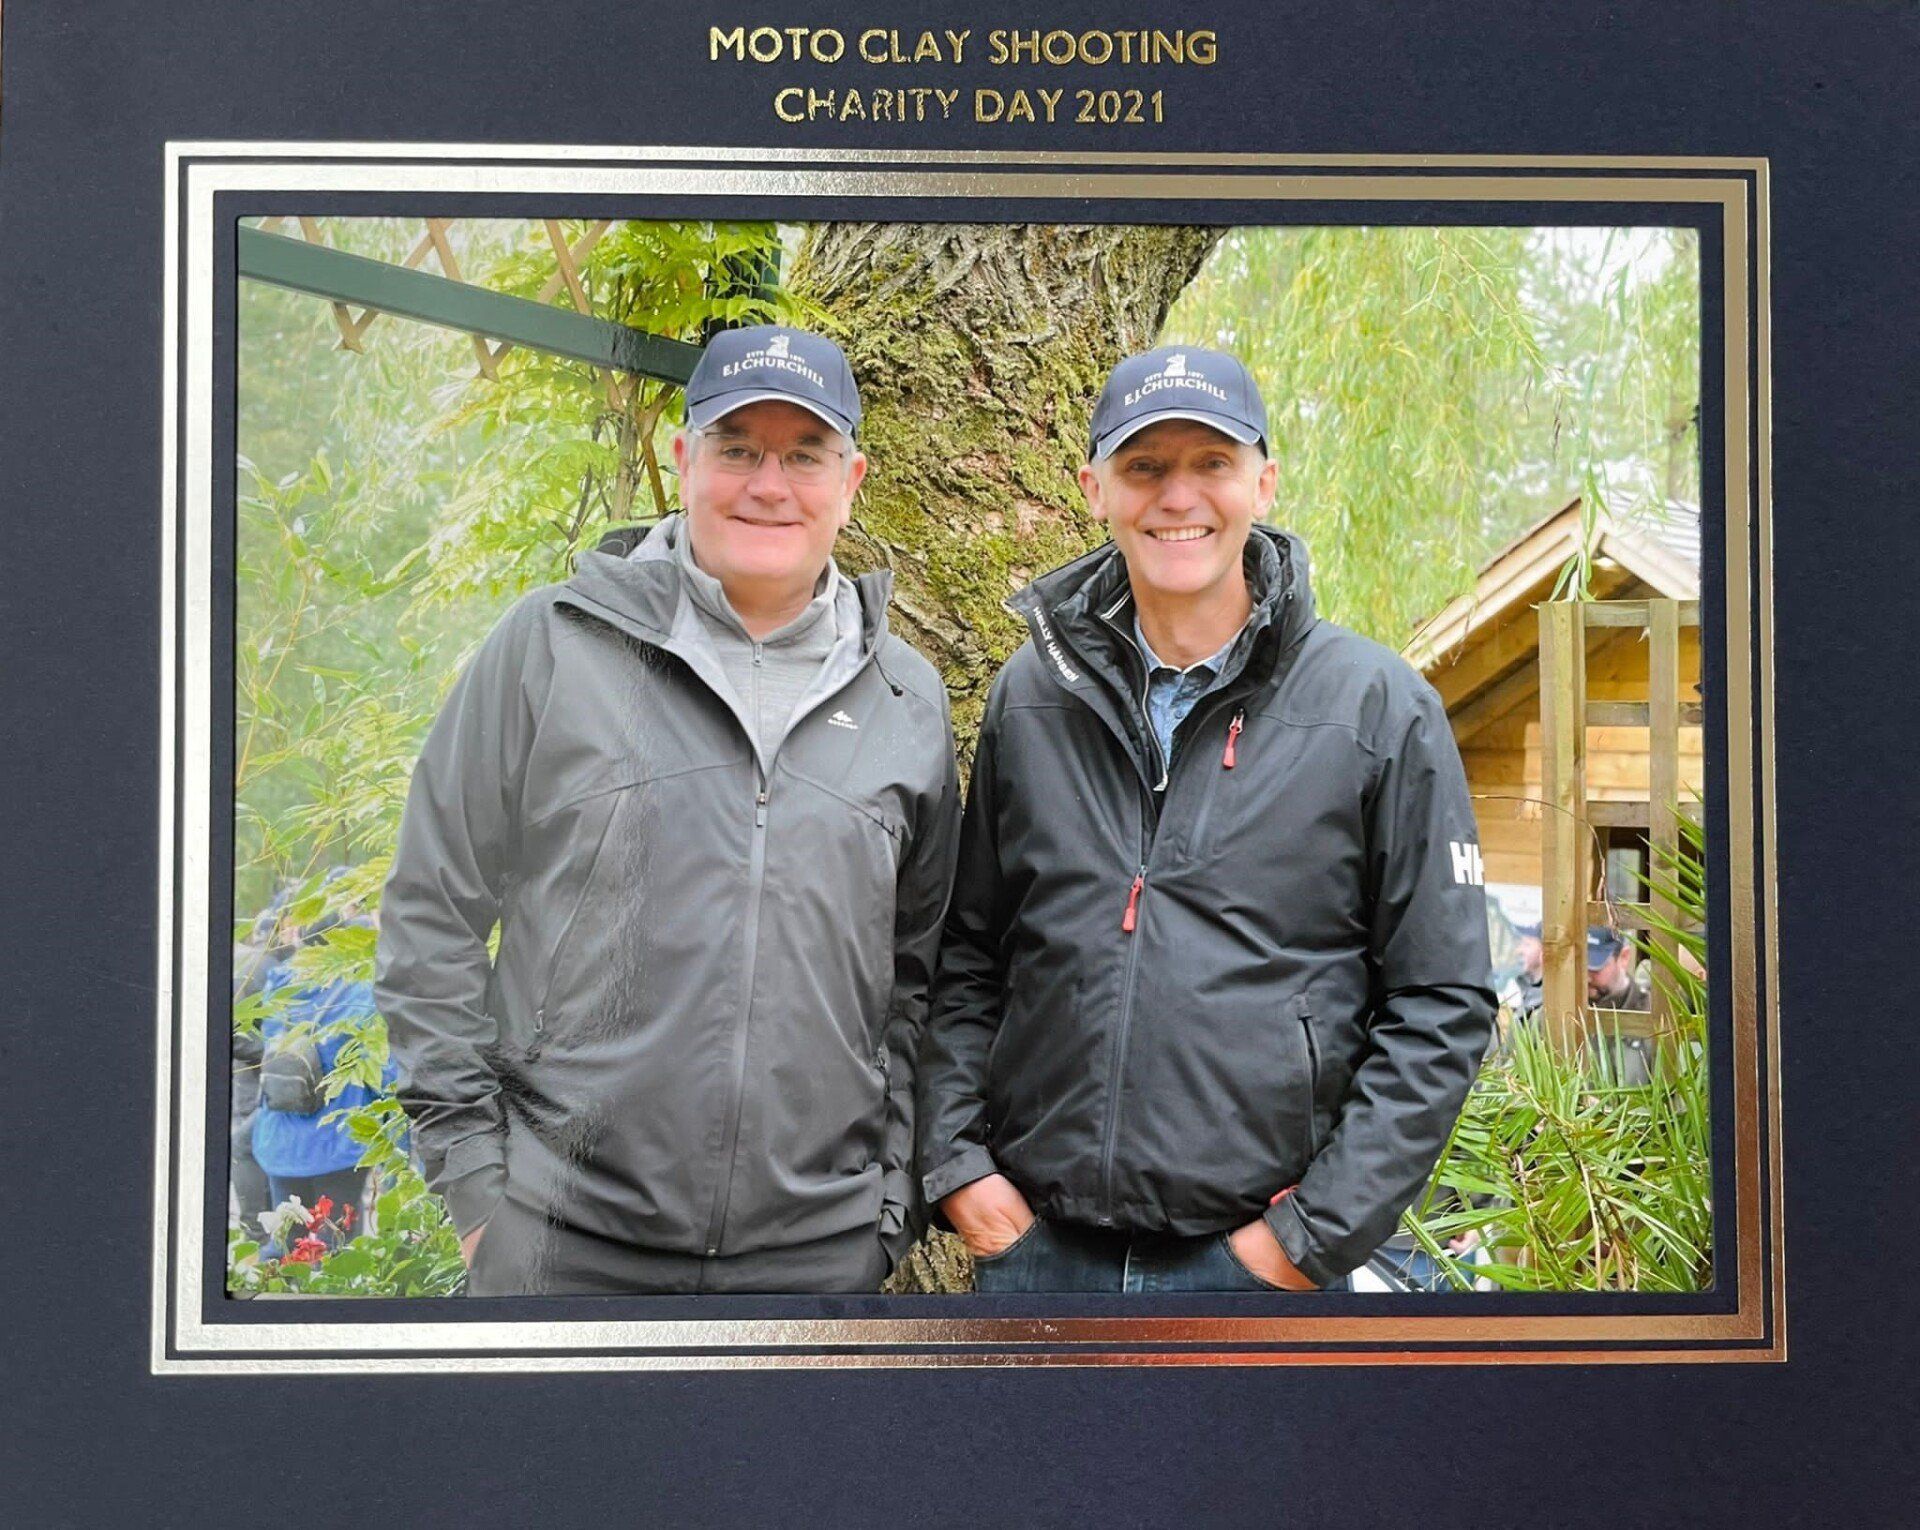 Onwatch team at Moto Clay Shooting Day 2021